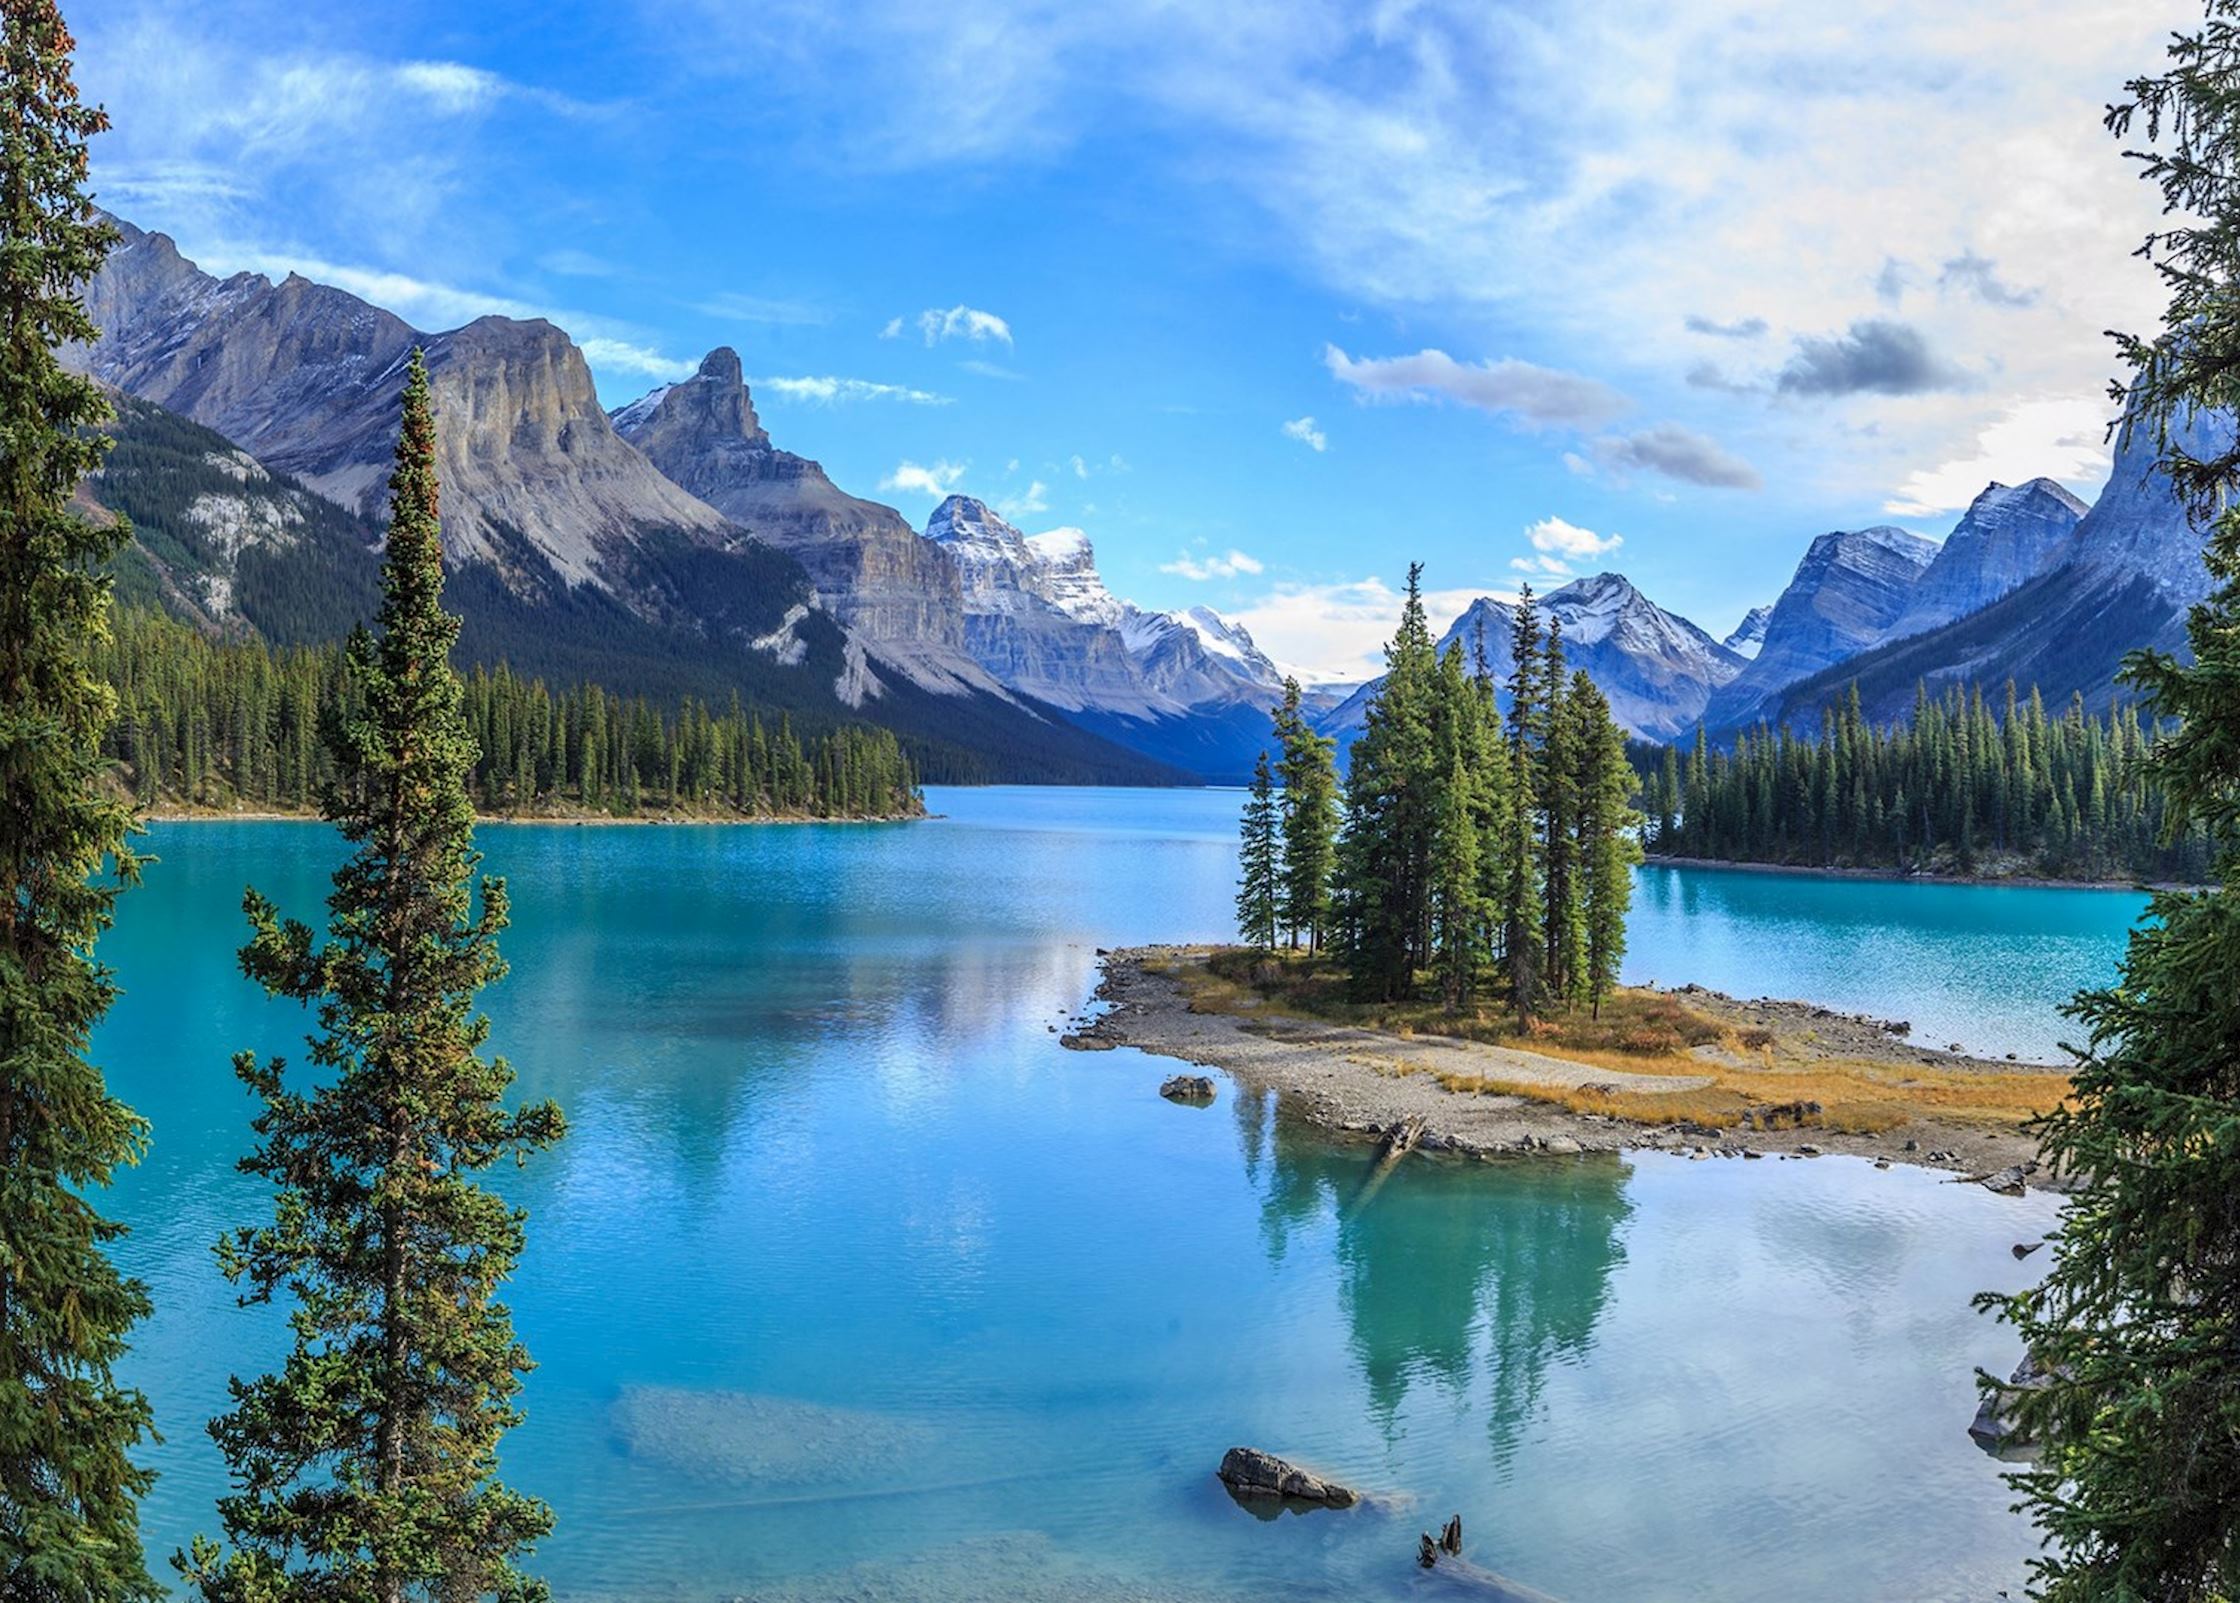 Visit Jasper on a trip to Canada | Audley Travel US